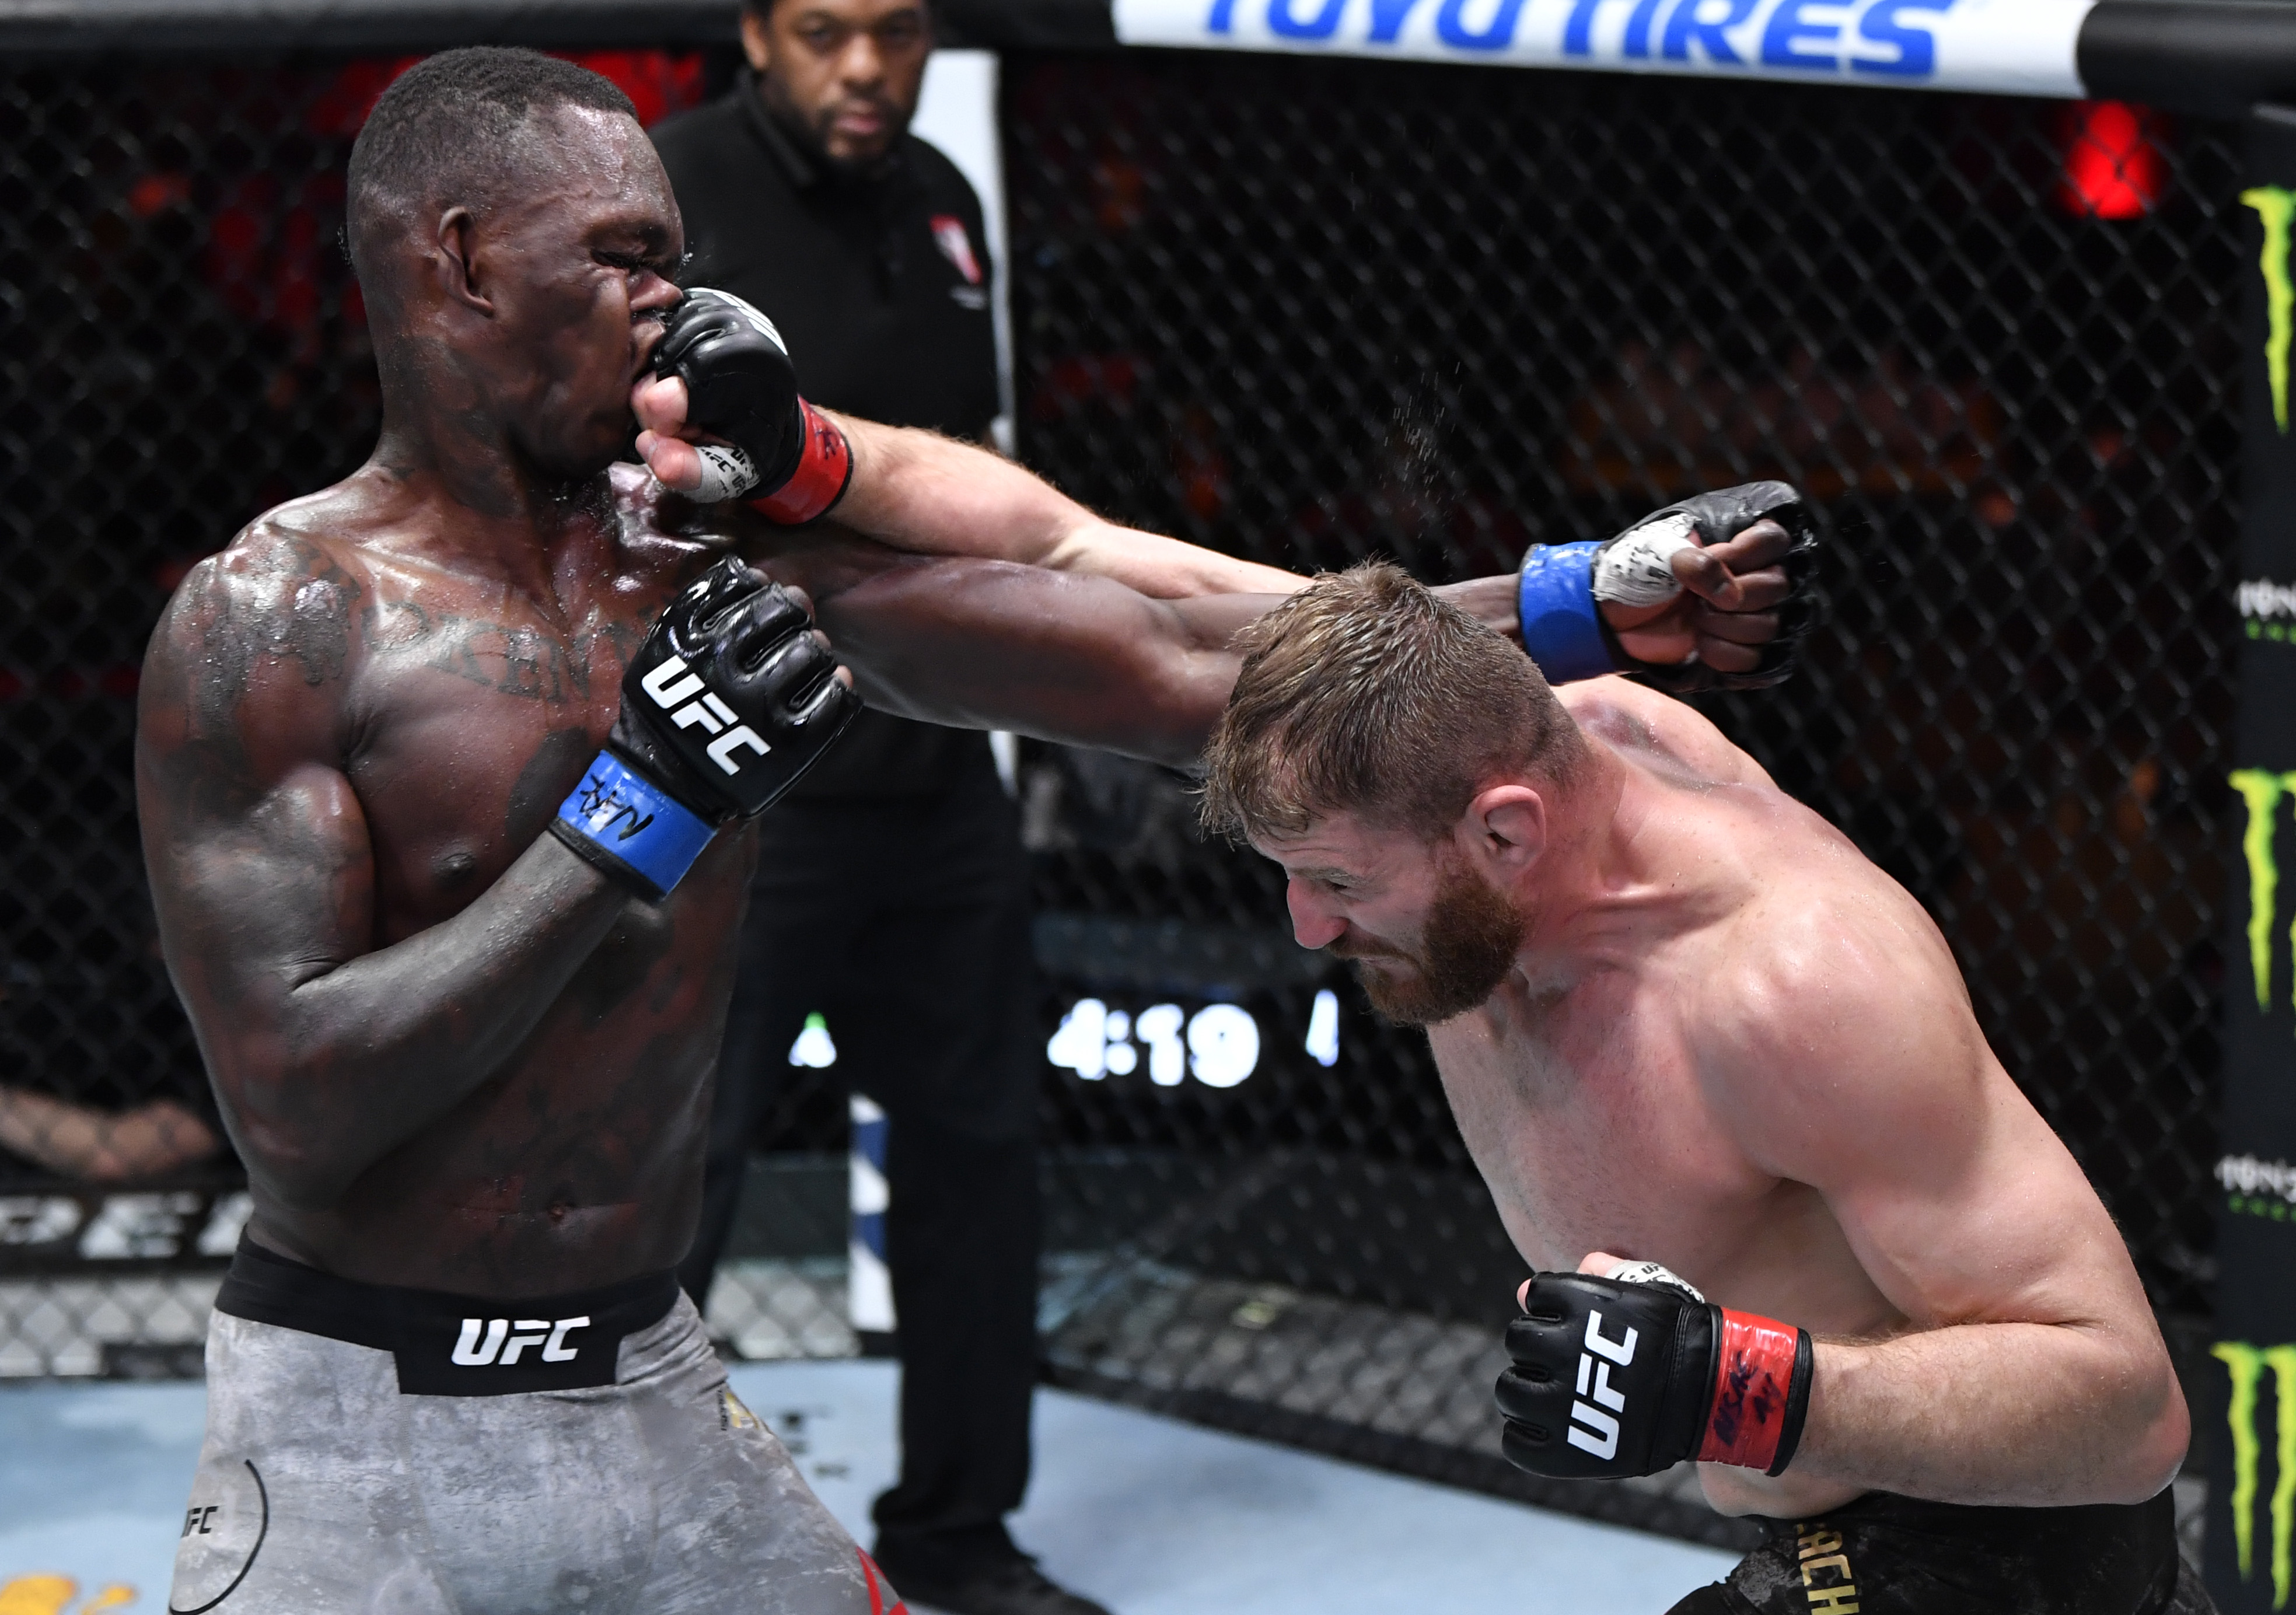 Jan Blachowicz outclasses Israel Adesanya at UFC 259: Fight card results,  video highlights, complete recap (3/6/2021) - oregonlive.com